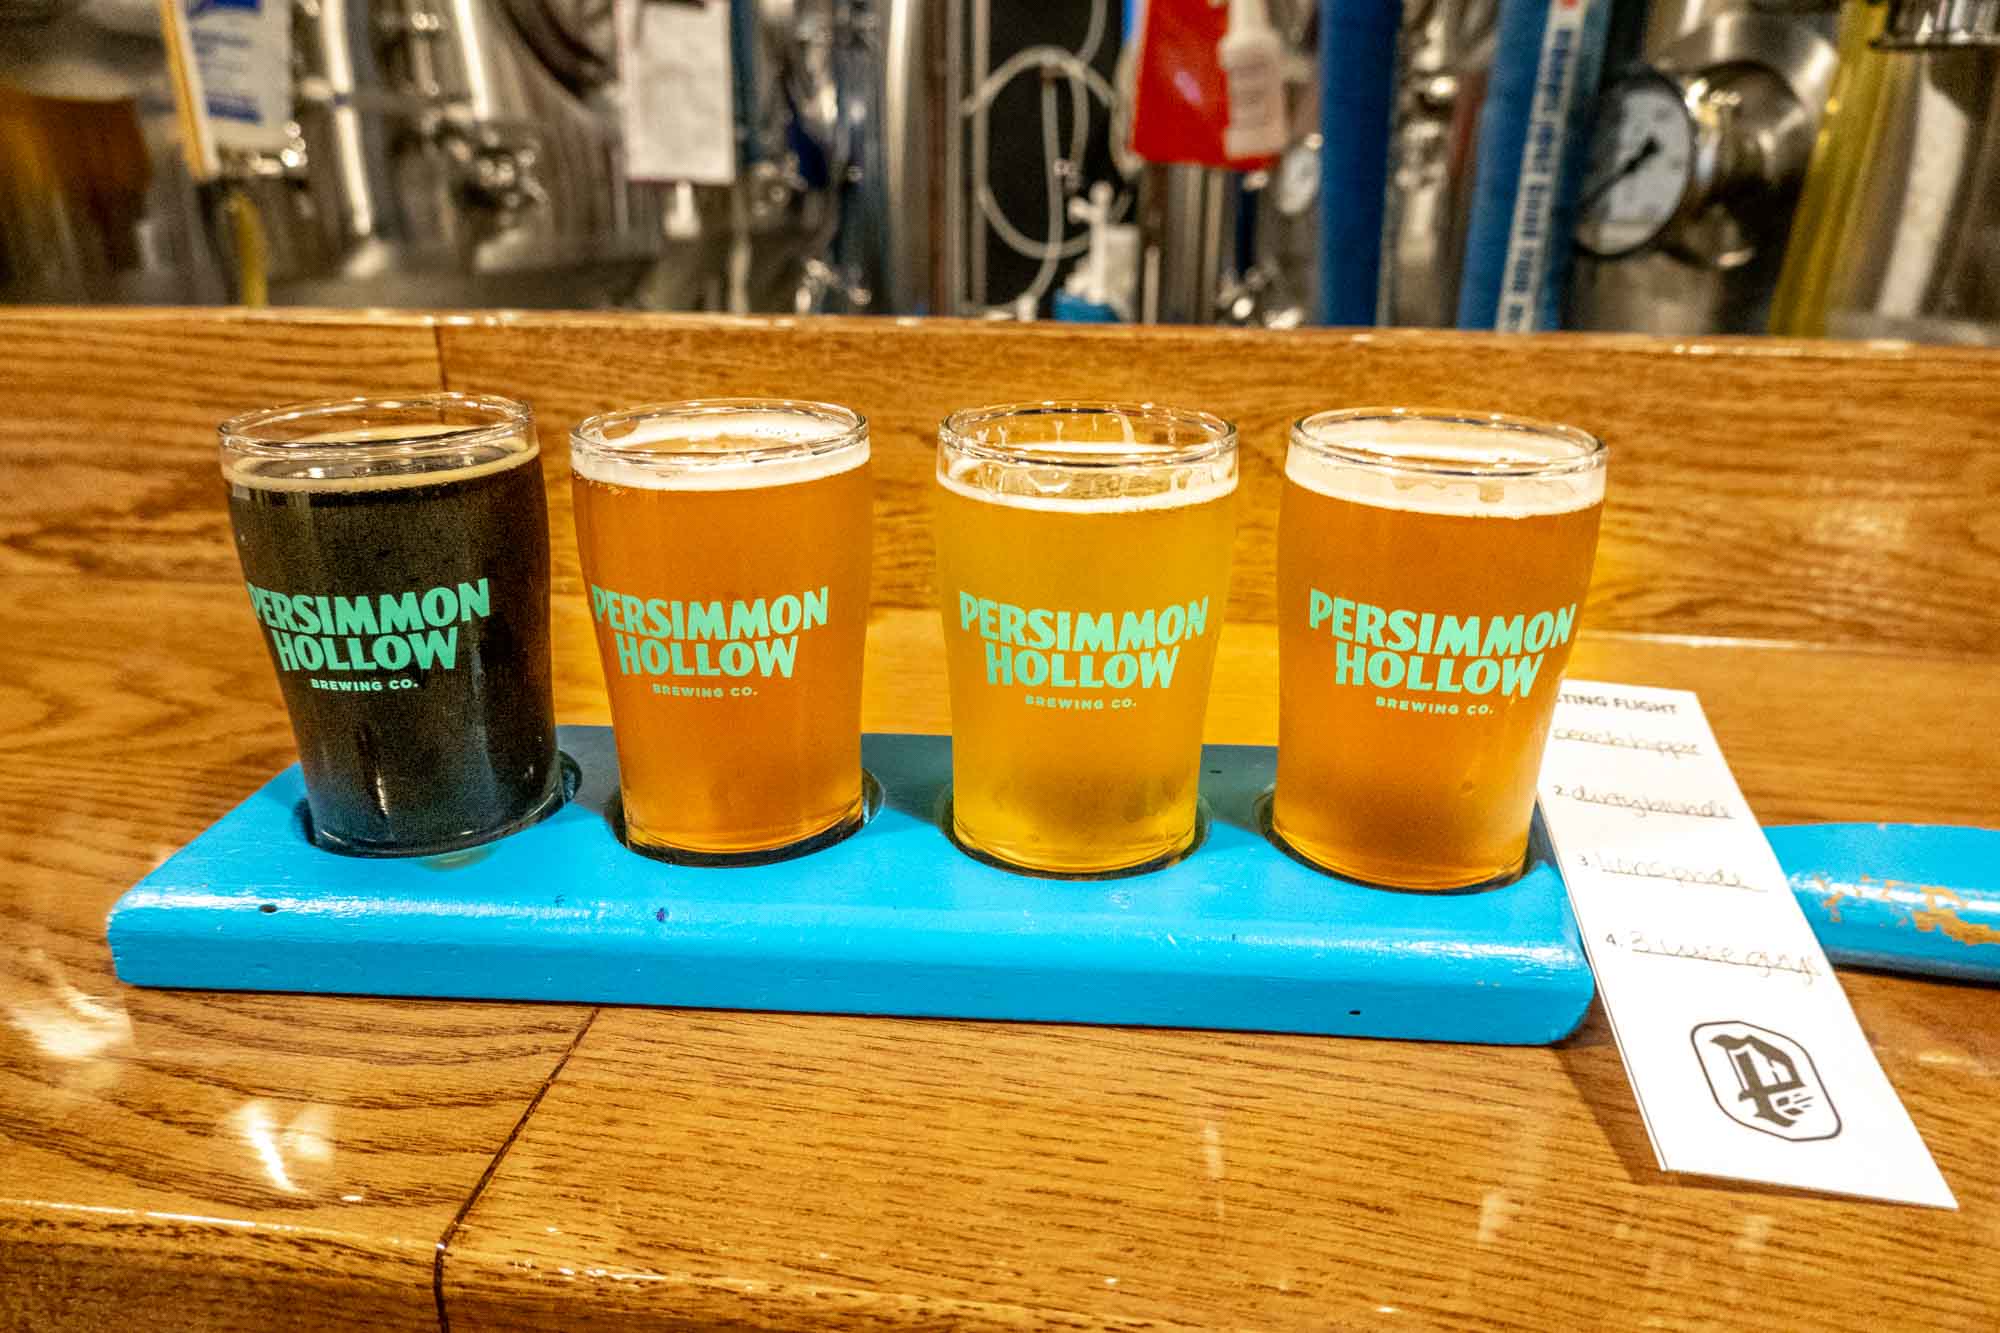 Flight of four beer glasses labeled "Persimmon Hollow Brewing Co." on a wooden bar